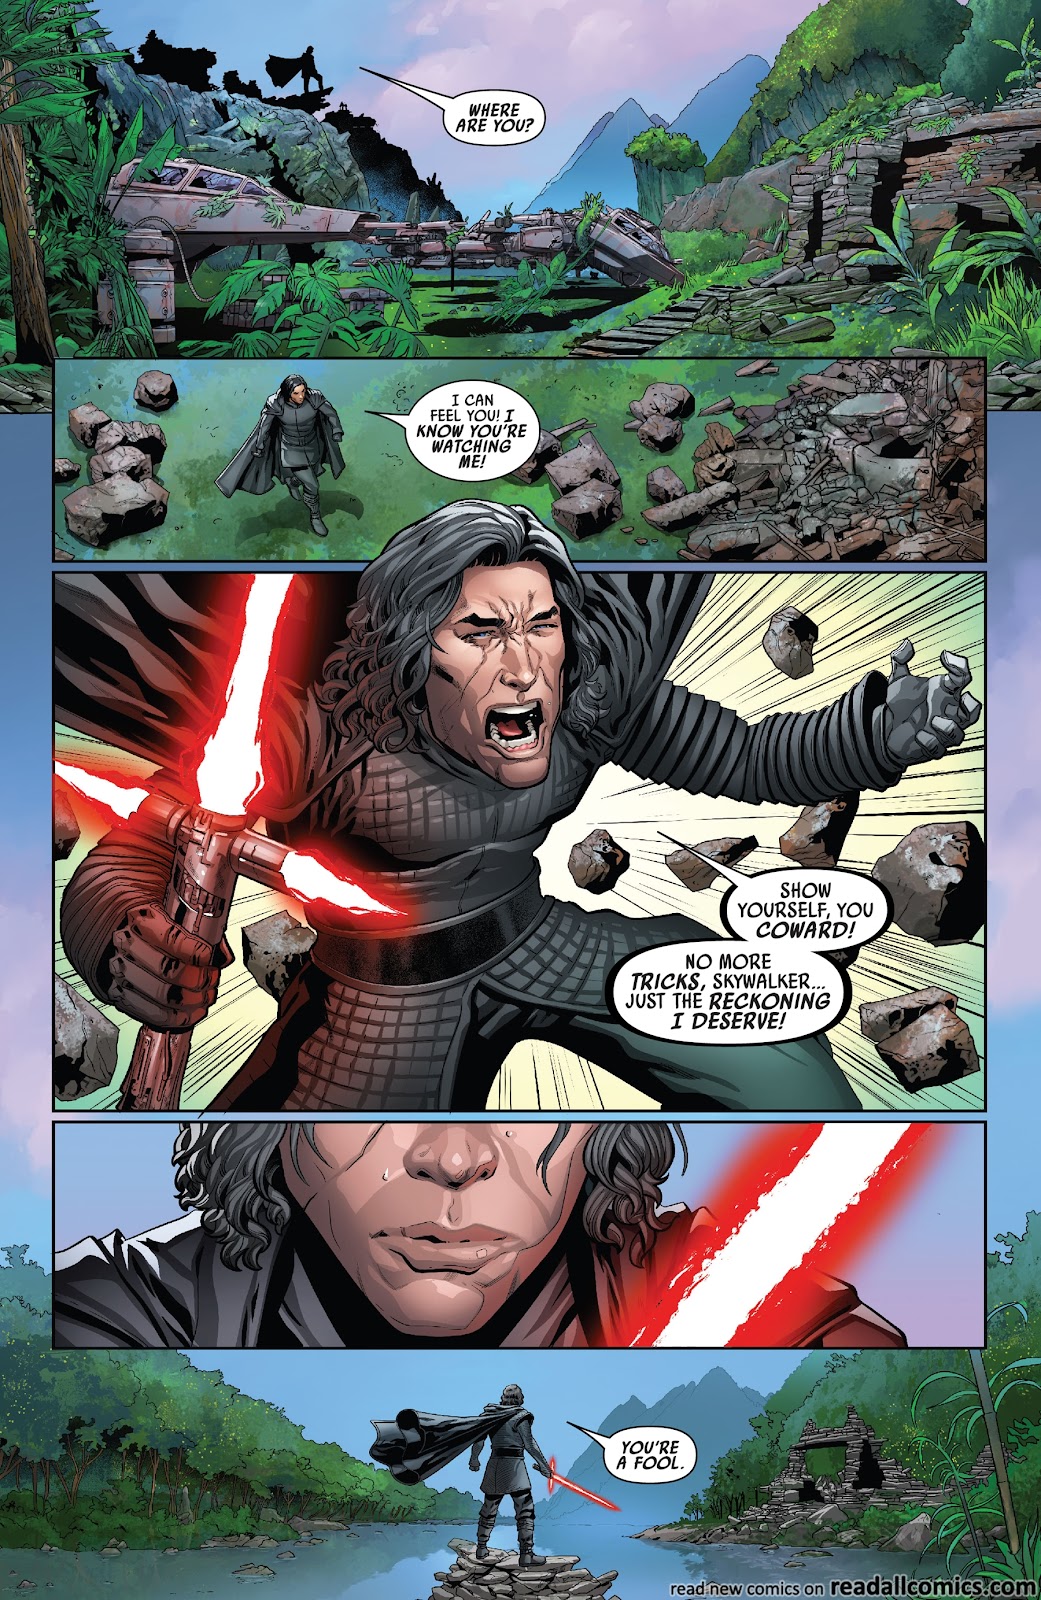 Star Wars V3 041 2018, Read Star Wars V3 041 2018 comic online in high  quality. Read Full Comic online for free - Read comics online in high  quality .